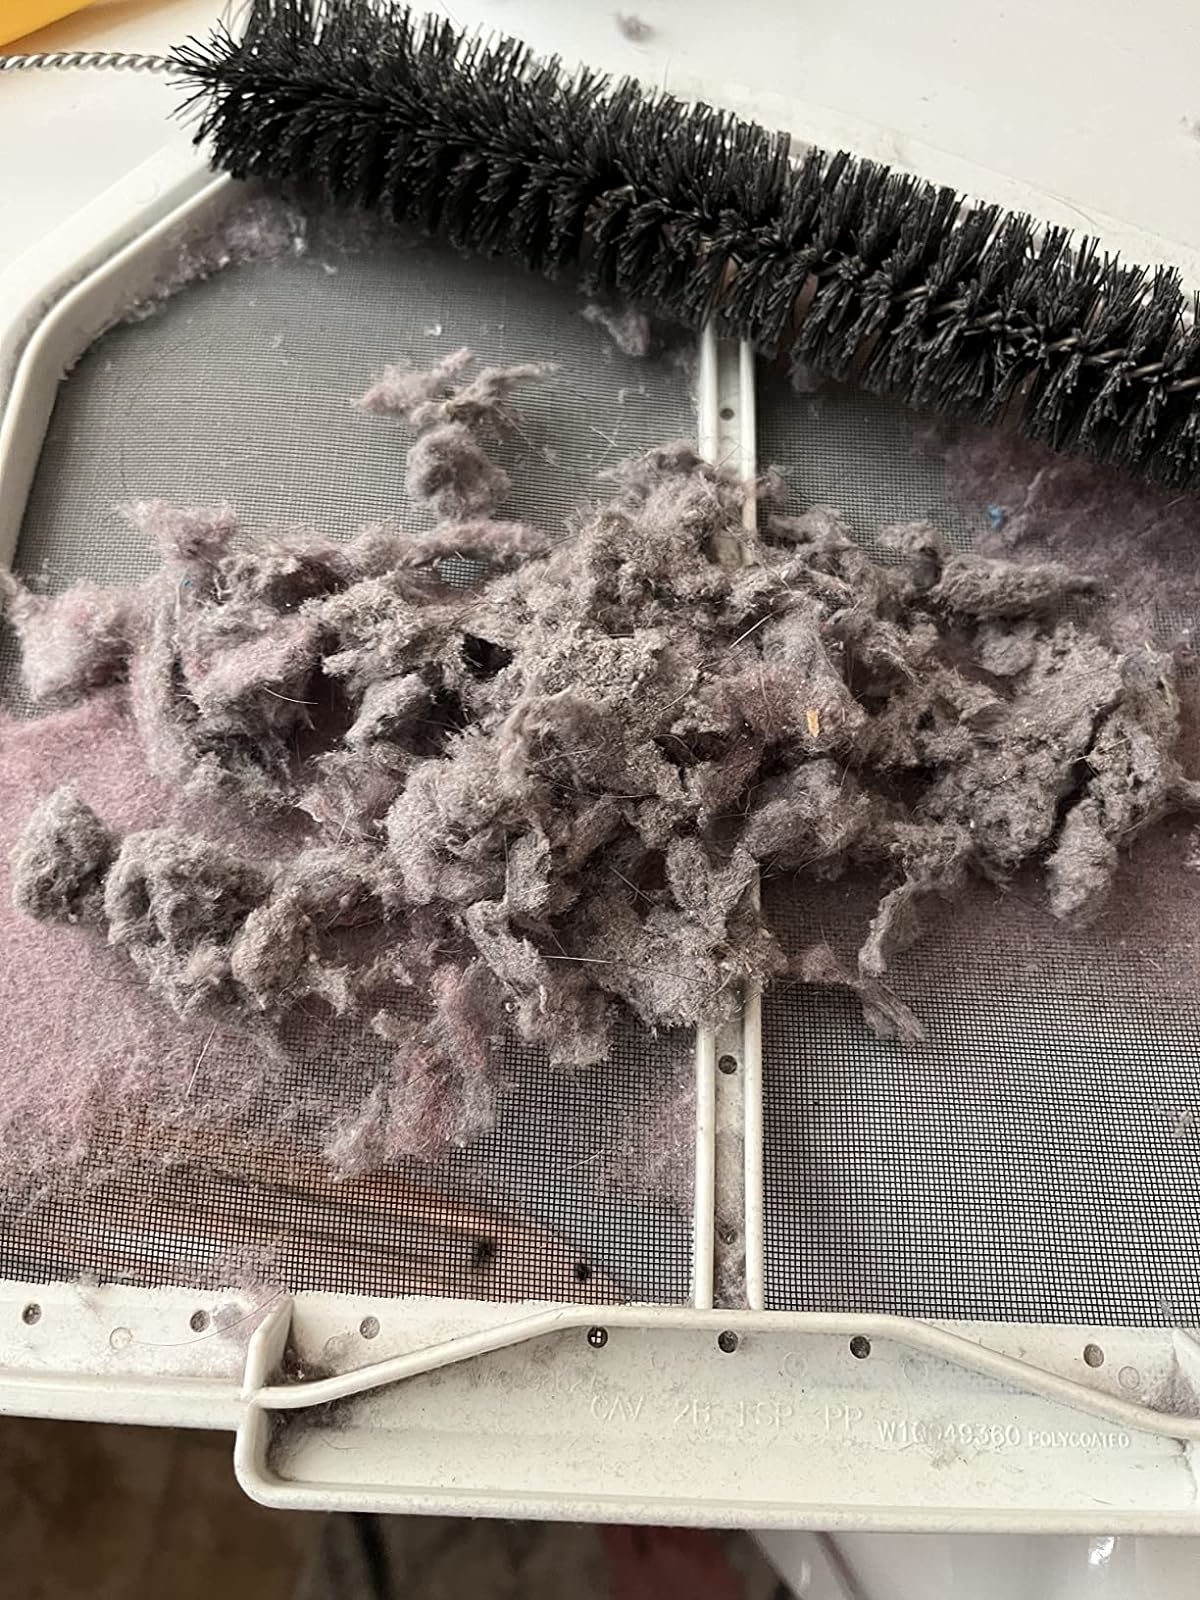 Reviewer’s photo of a clump of lint